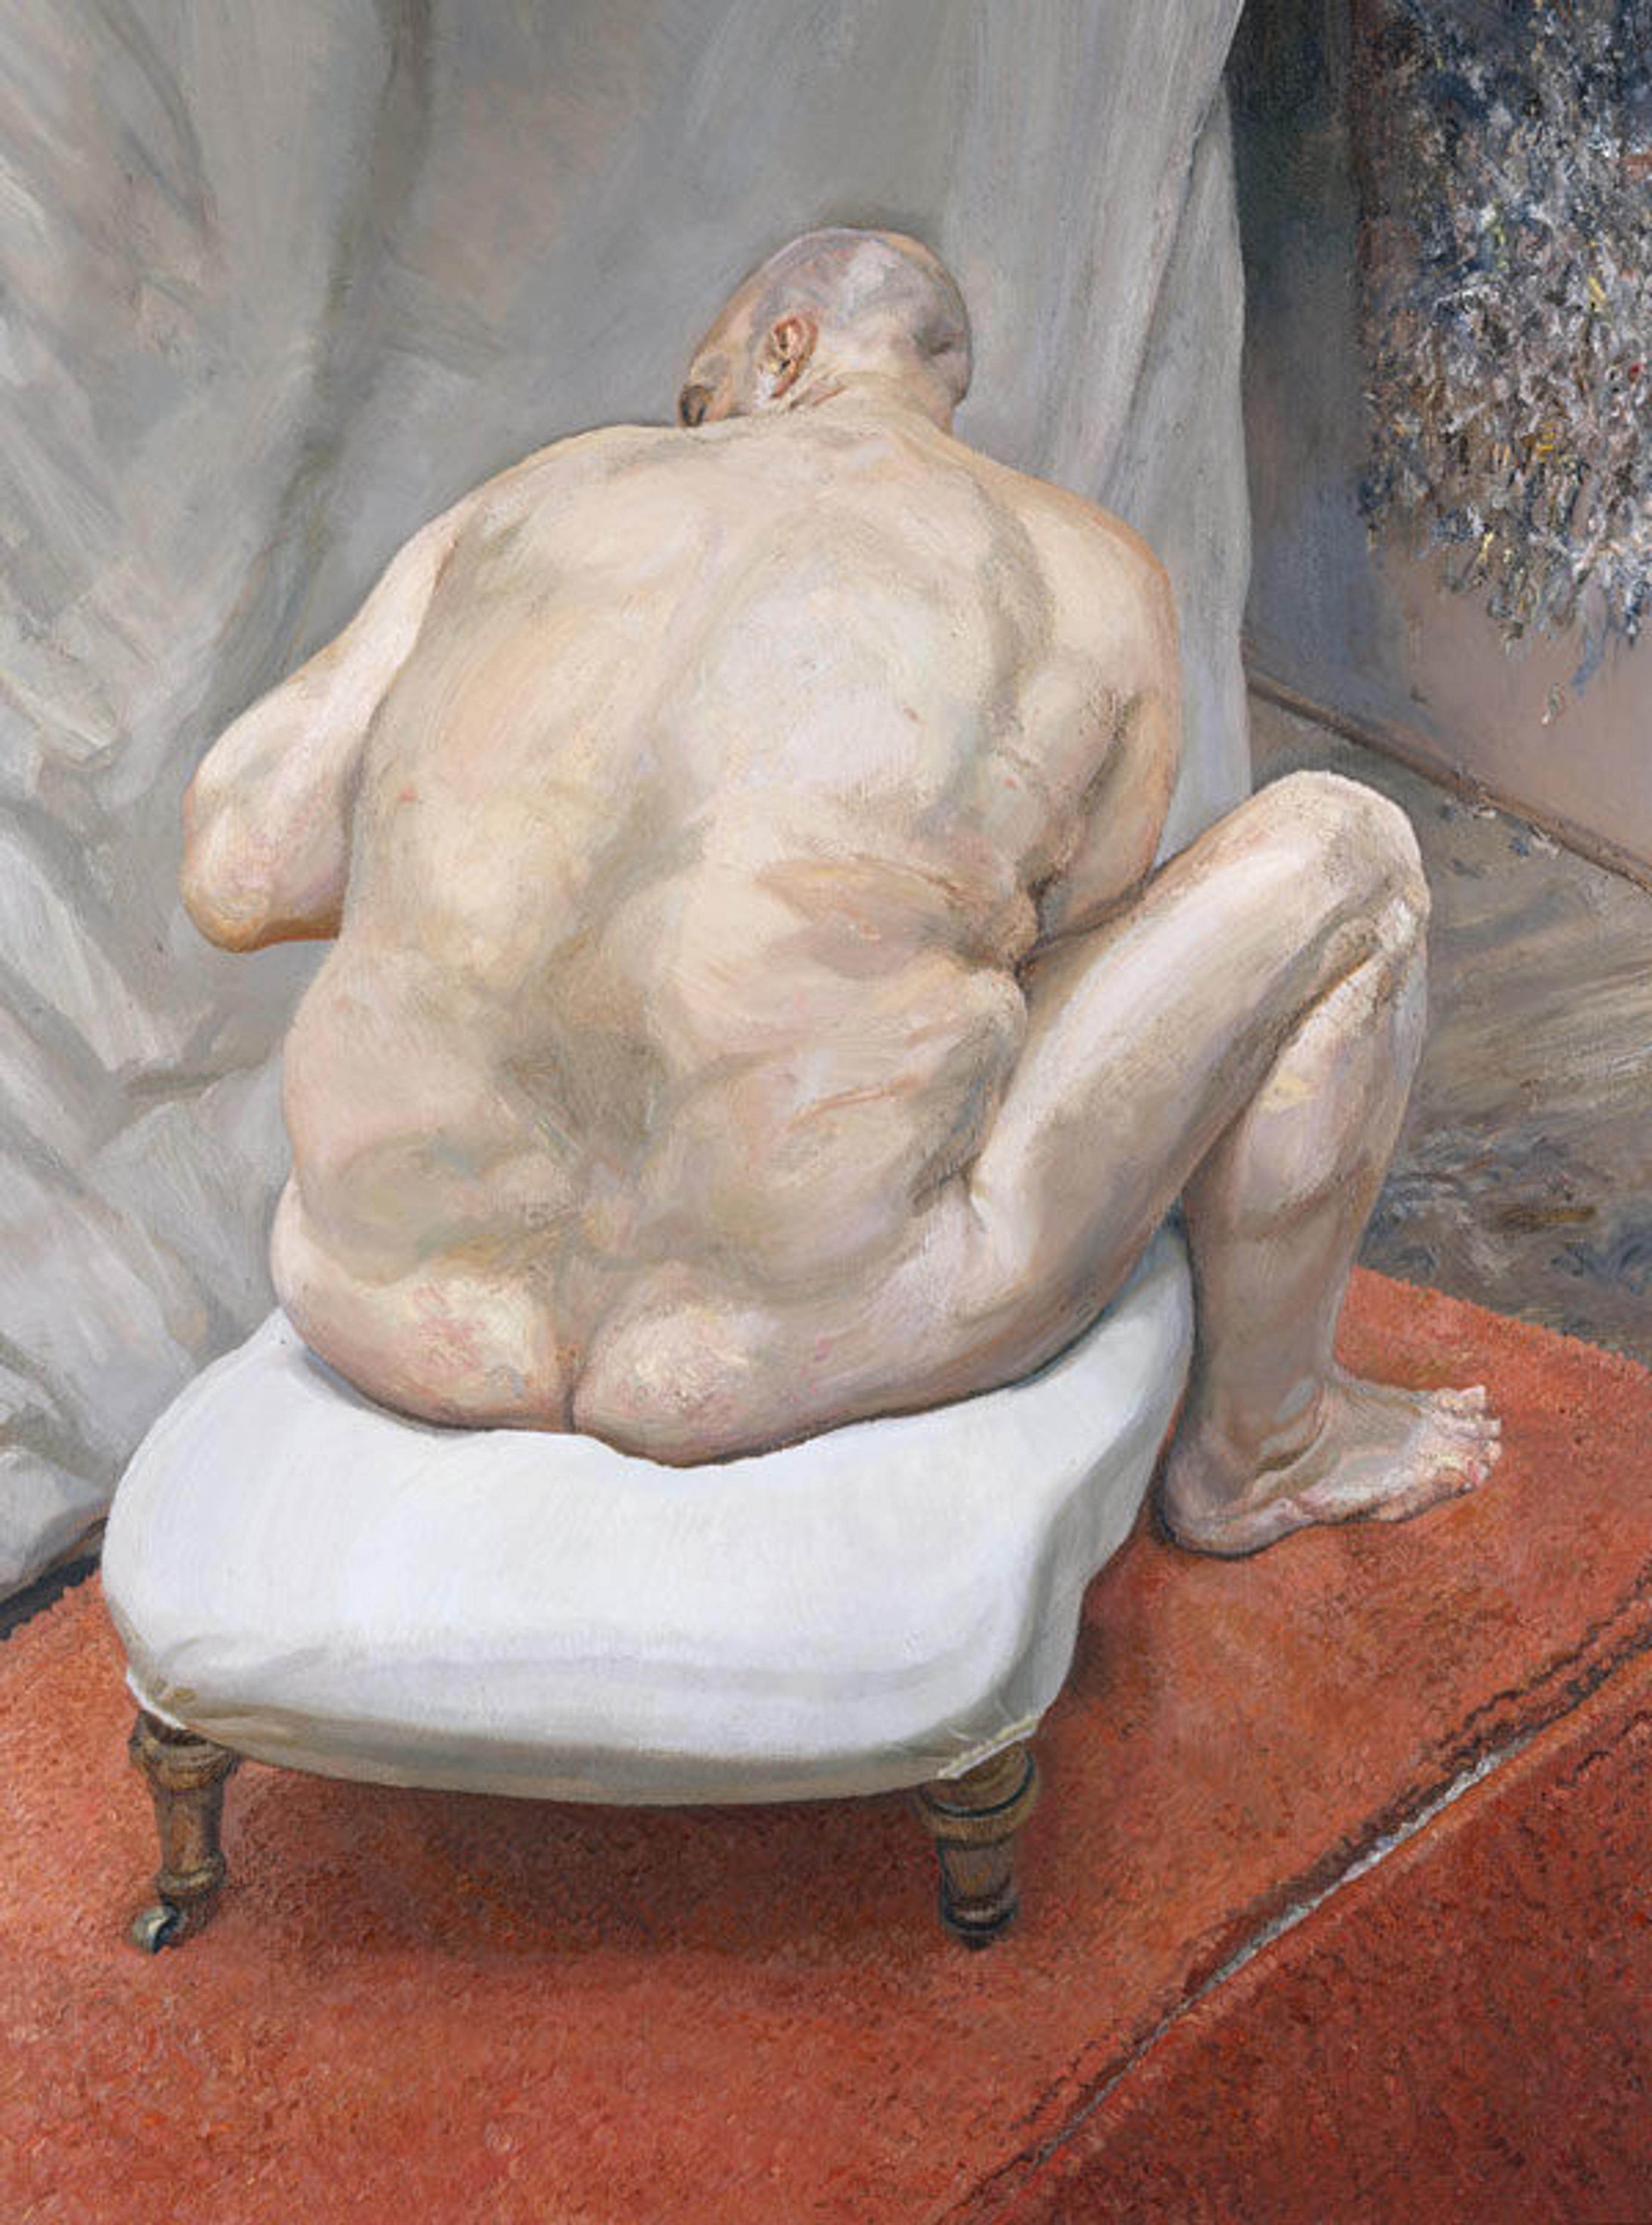 Lucian Freud, (British [born Germany], 1922–2011). Naked Man, Back View, 1991–92. Oil on canvas, 72 x 54 in. (182.9 x 137.2 cm). The Metropolitan Museum of Art, New York, Purchase, Lila Acheson Wallace Gift, 1993 (1993.71)